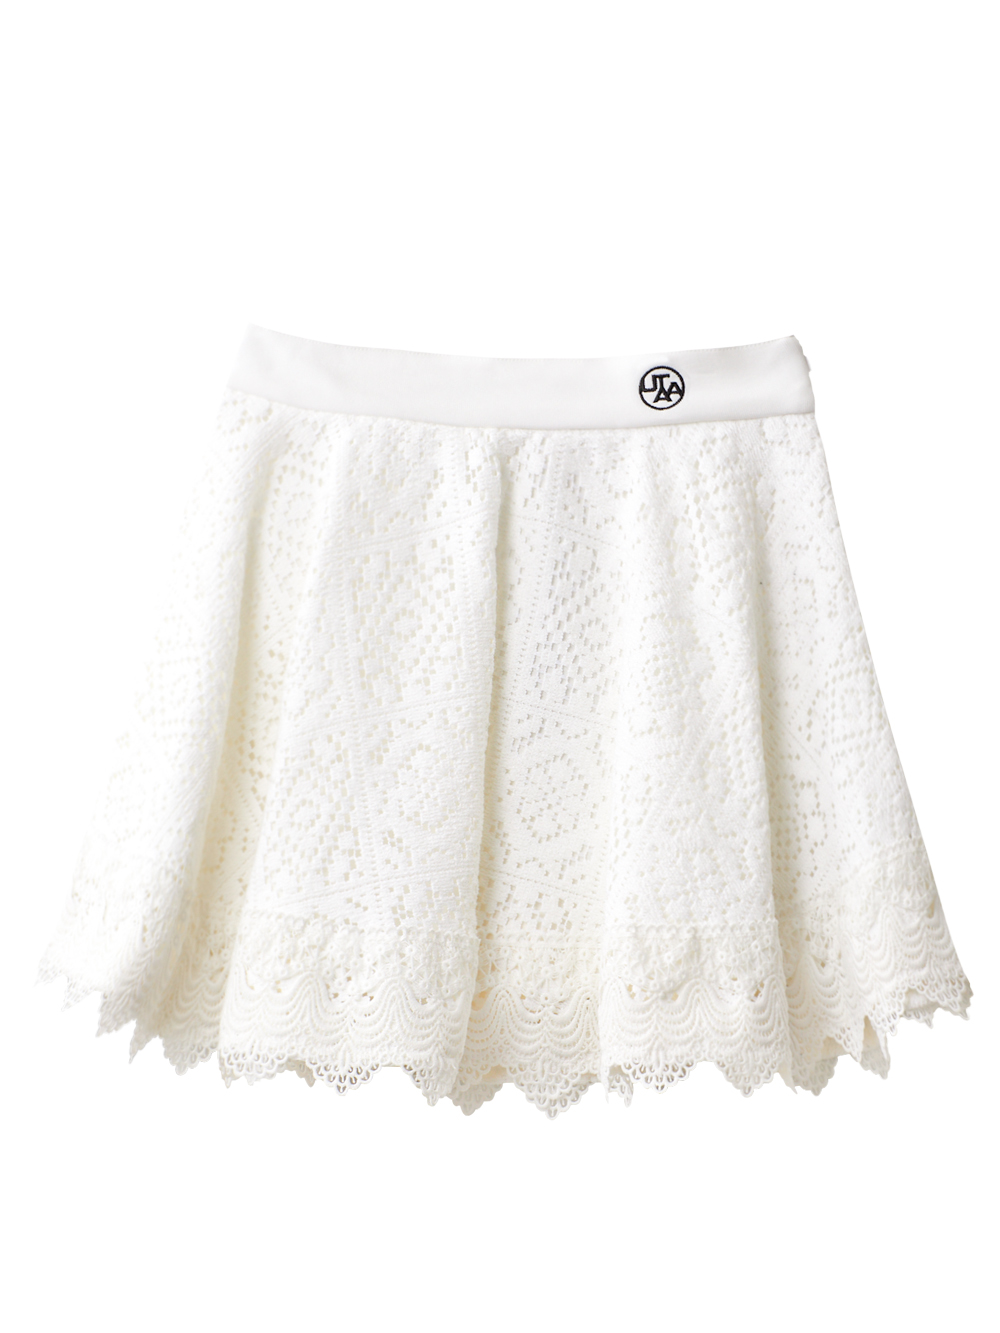 UTAA Pixel Tile Lace Flare Skirt : White(UC3SSF412WH)